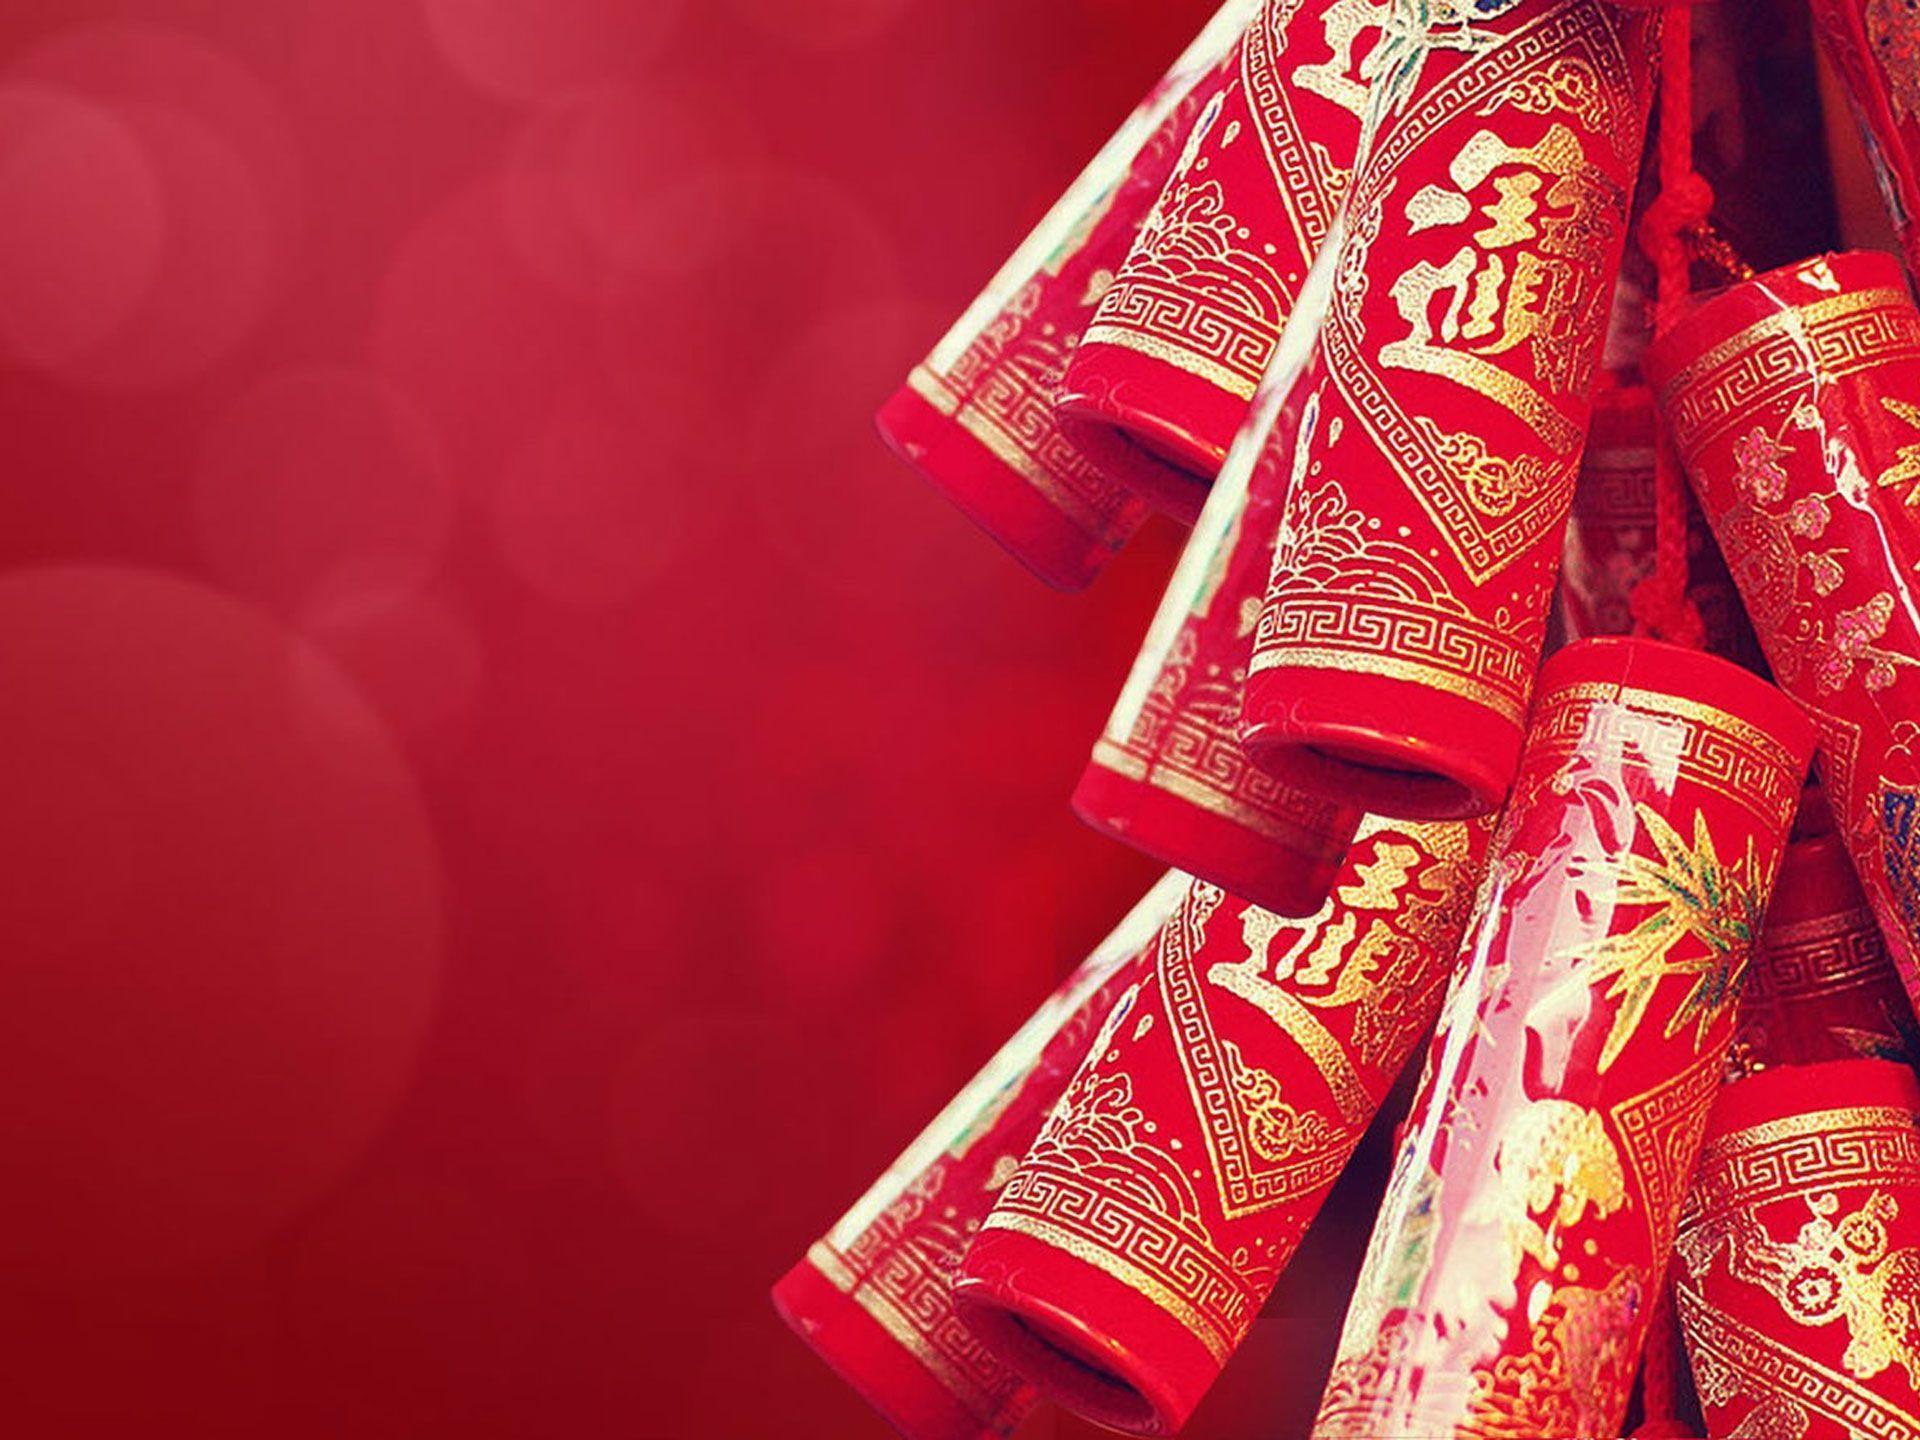 Chinese New Year Wallpaper HD. HD Wallpaper, Background, Image